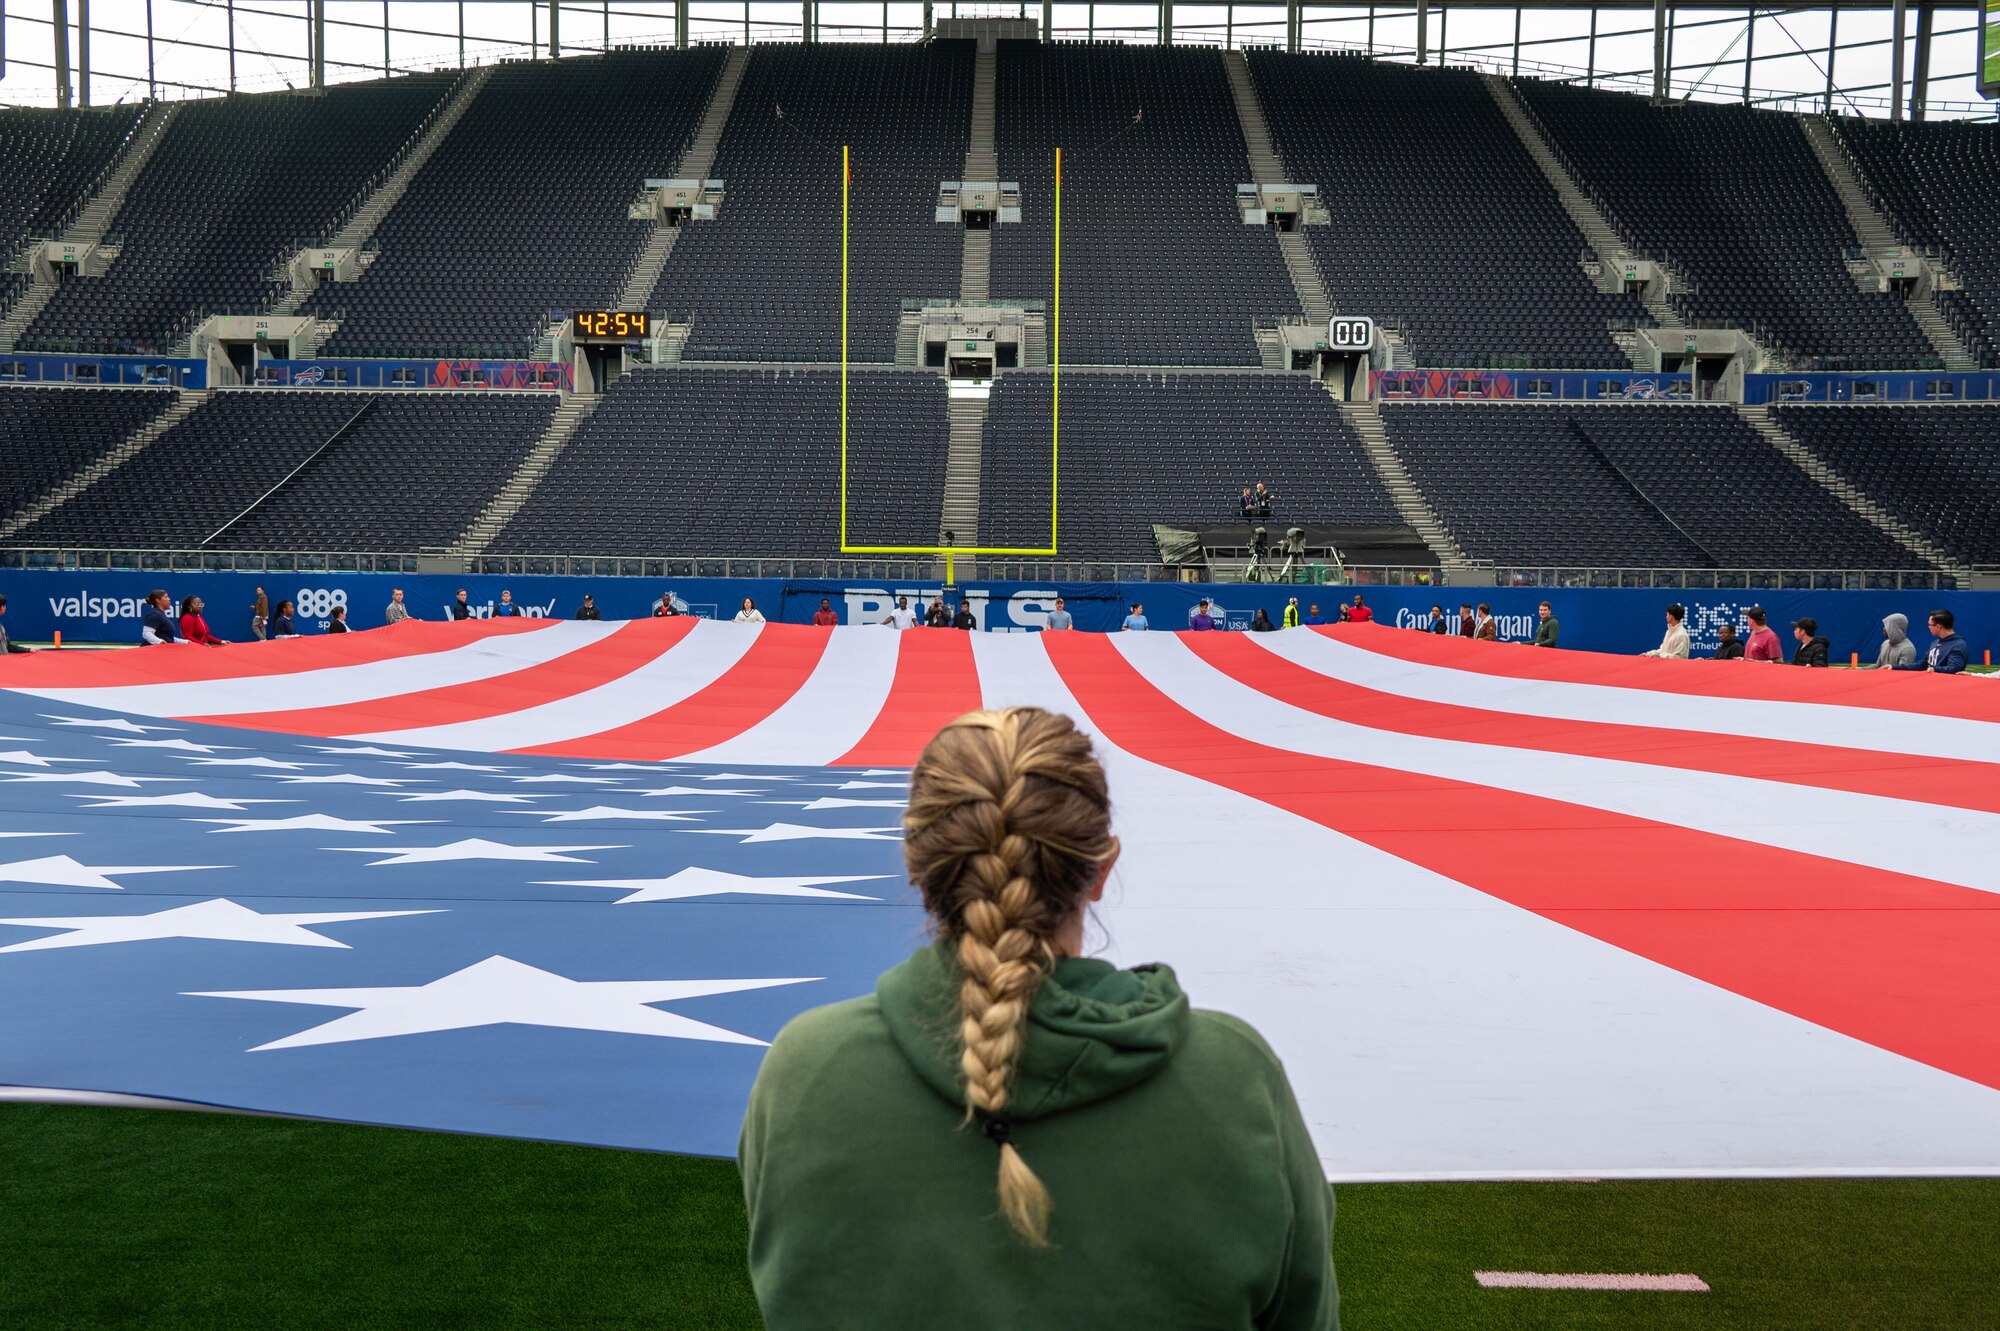 Volunteers hold an American flag on a football field during a practice